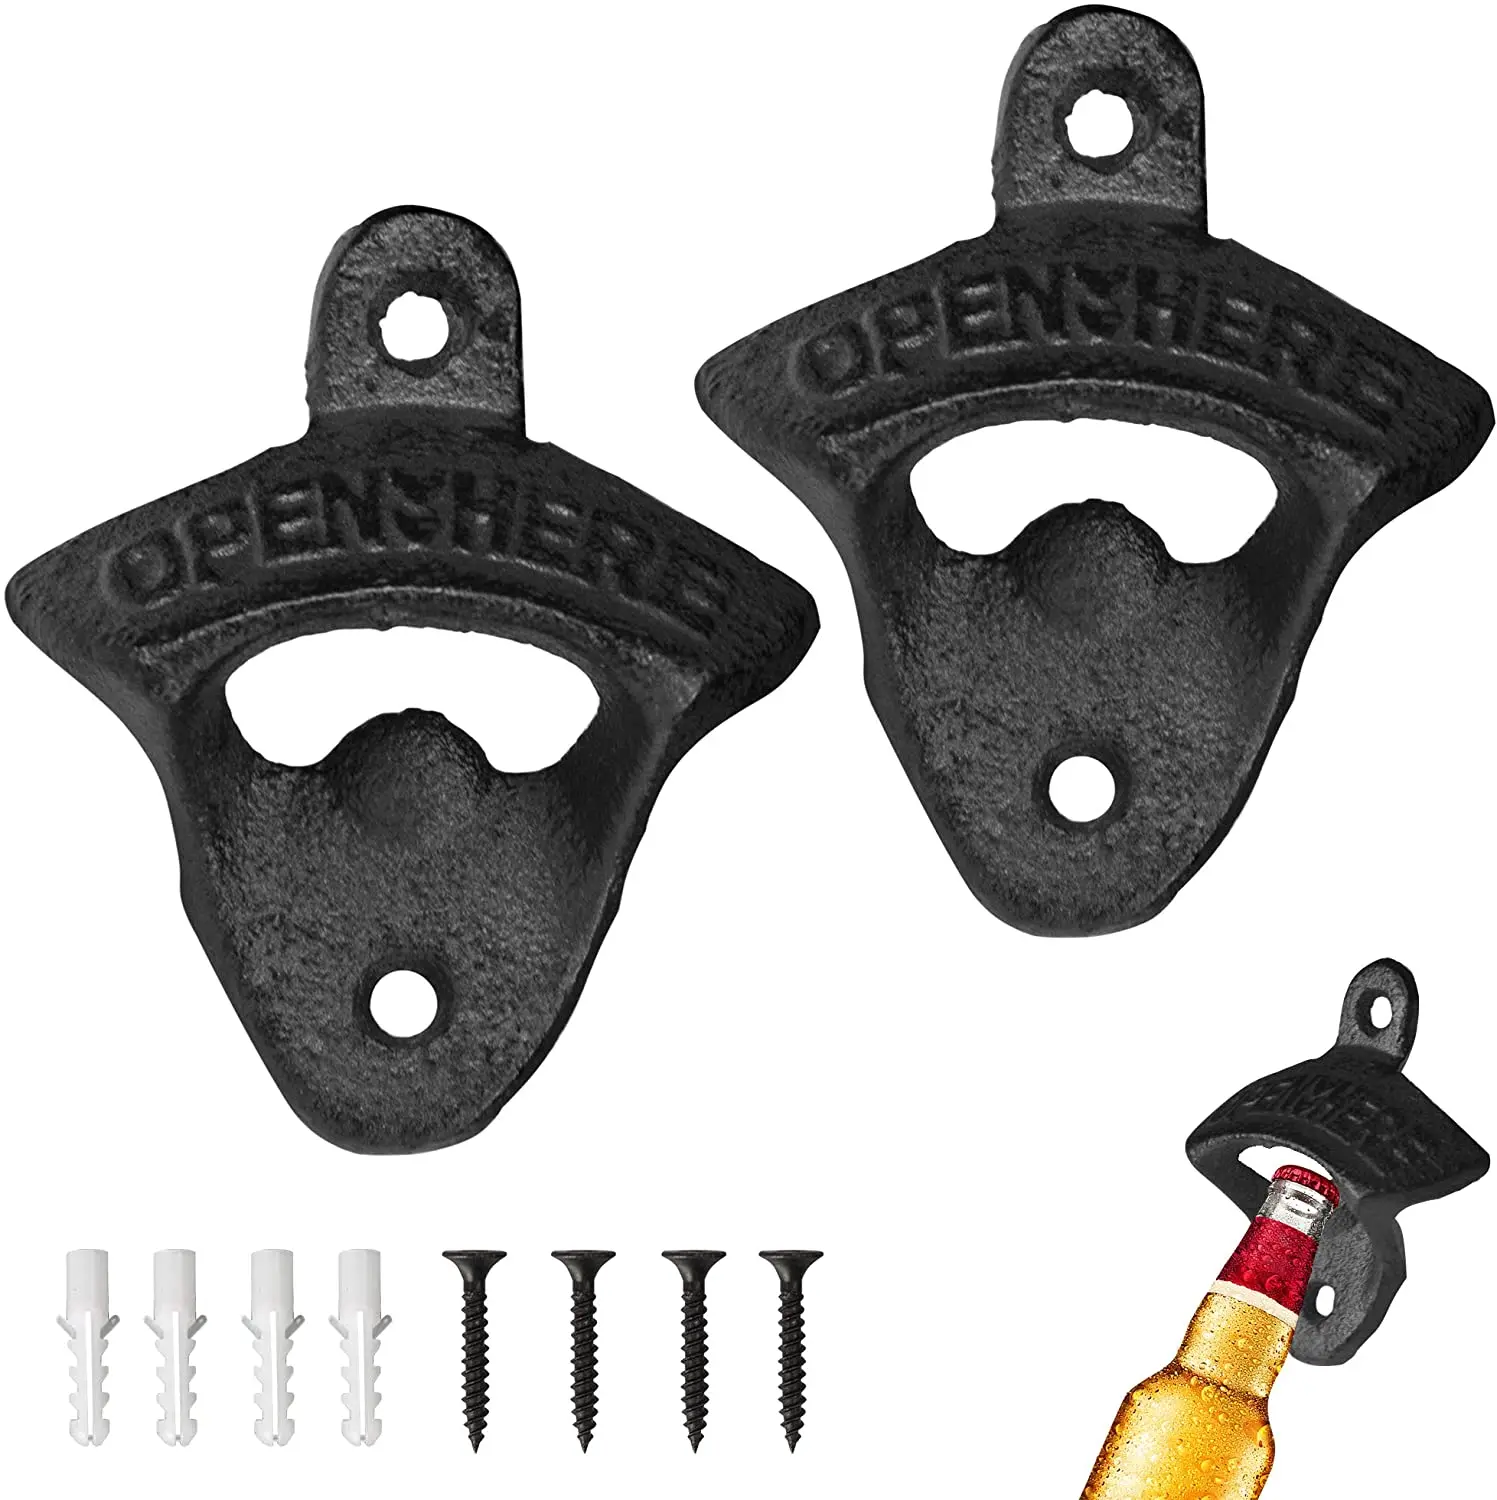 1PC Beer Opener Wall Mounted Home Bar Bottle Fixed Wine With Screws Cast Iron